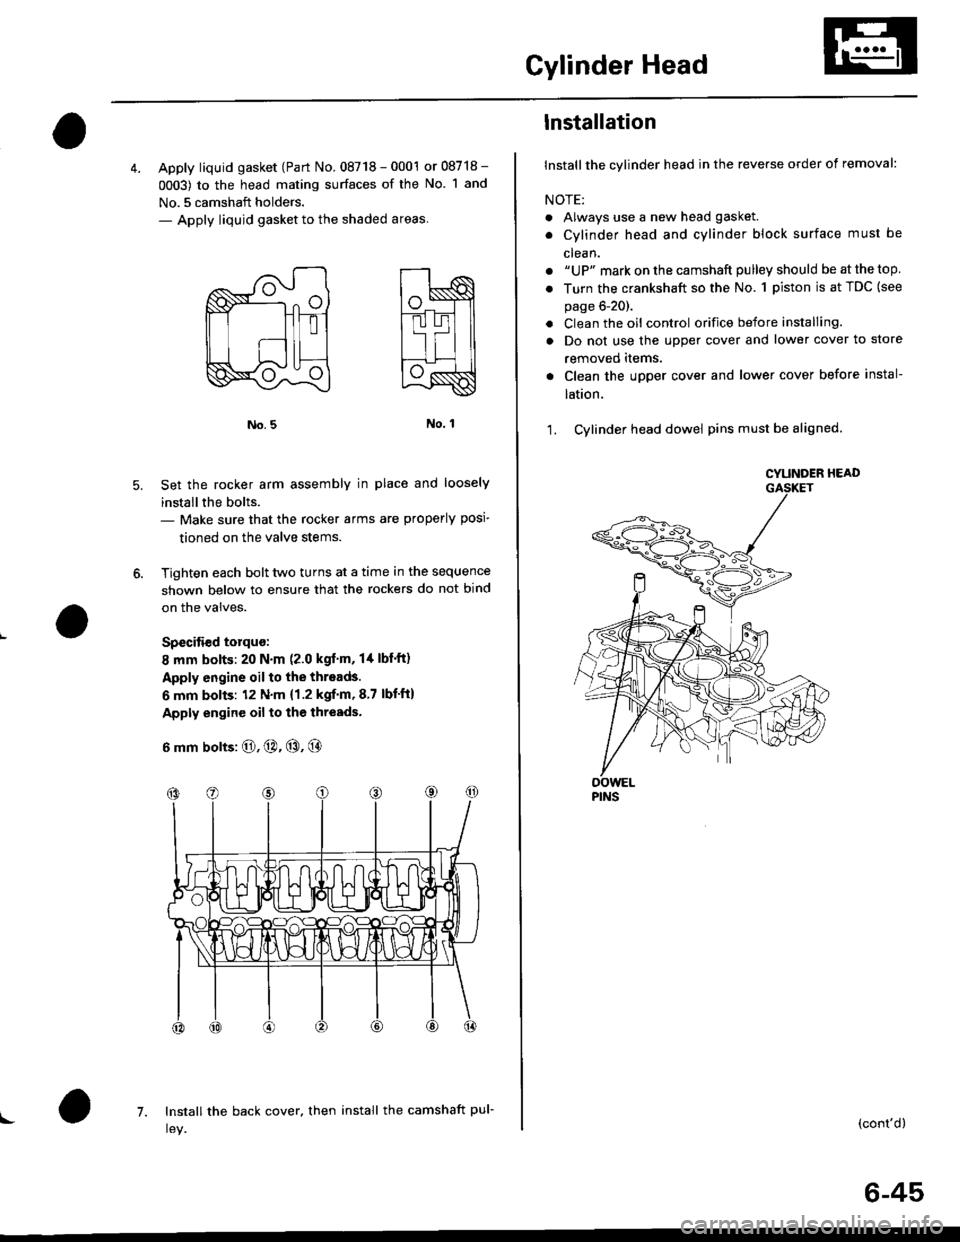 HONDA CIVIC 2000 6.G Owners Guide Cylinder Head
4. Apply liquid gasket (Part No. 08718 - 0001 or 08718 -
0003) to the head mating surfaces of the No. 1 and
No.5 camshaft holders.- Apply liquid gasket to the shaded areas
Set the rocker